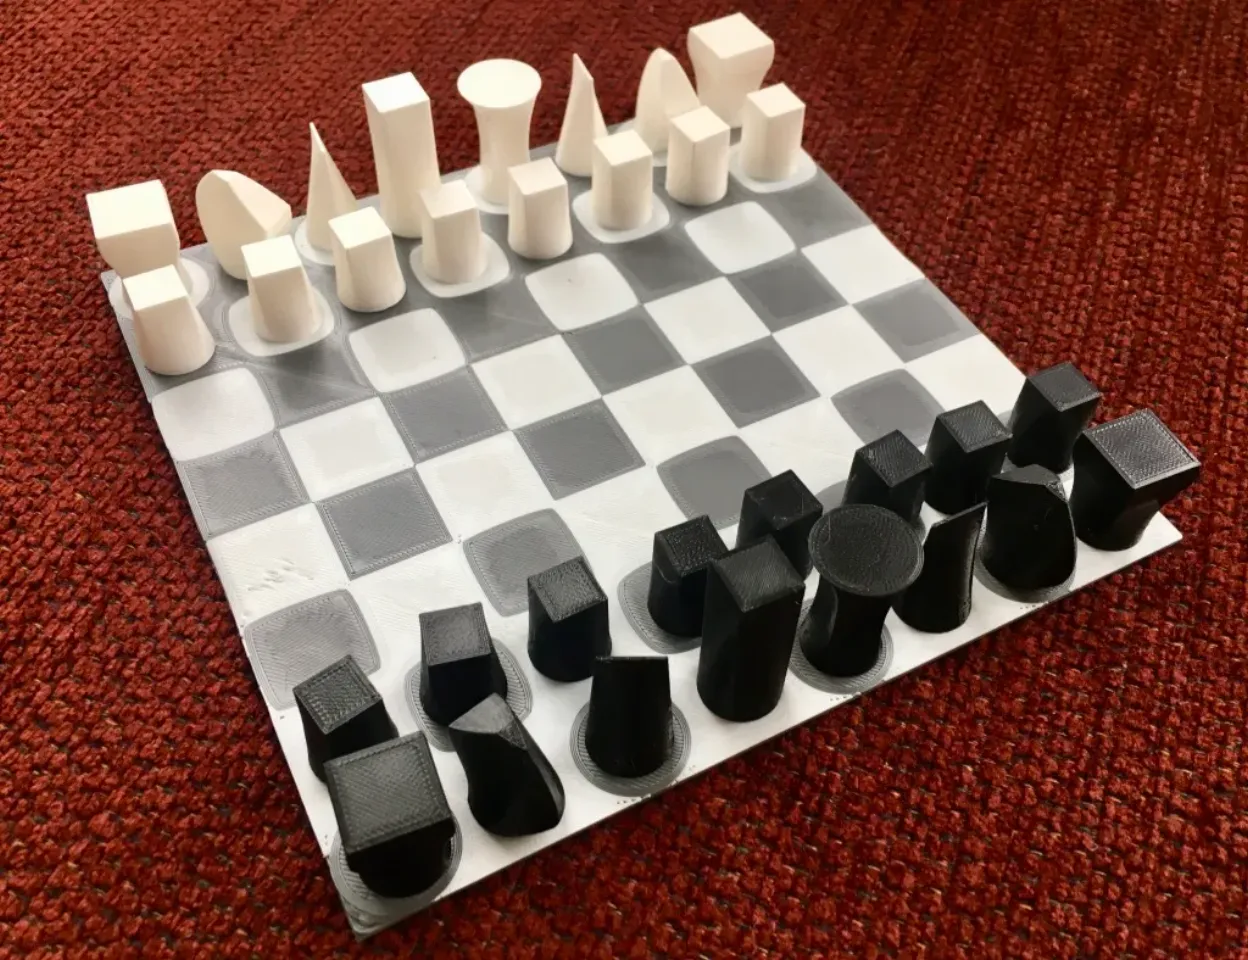 Please help me identify an old chess game